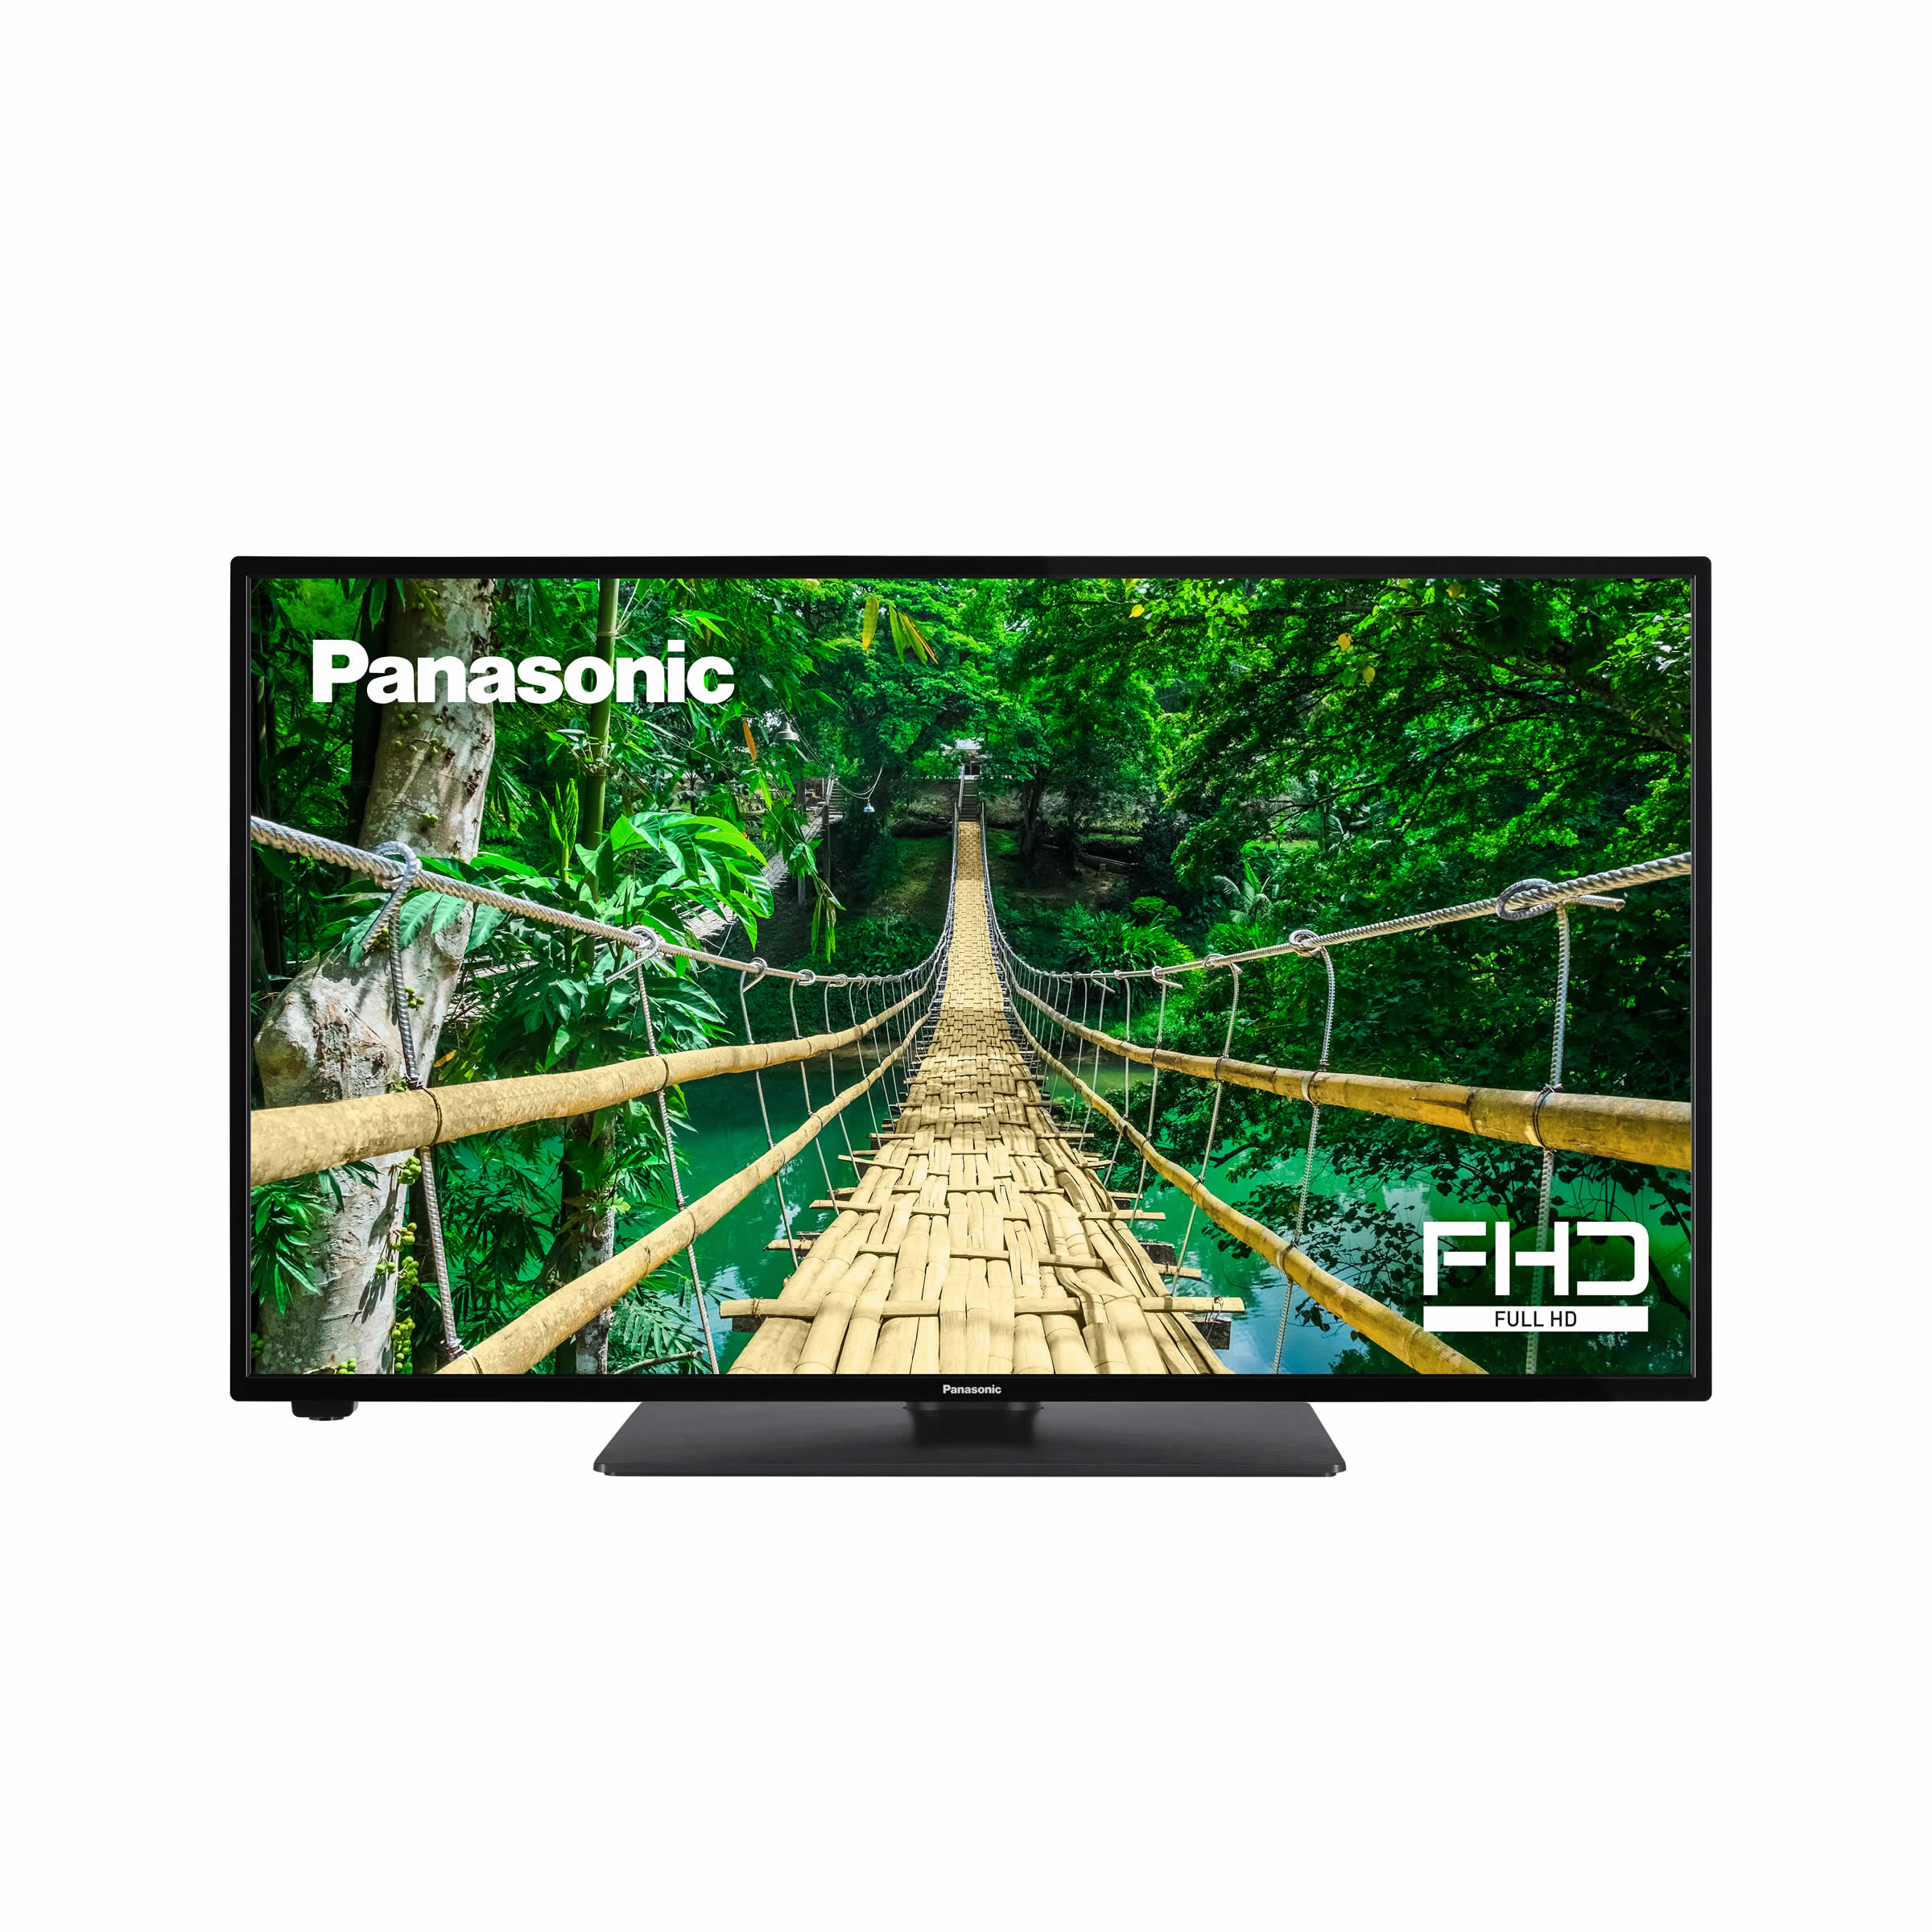 Panasonic 40inch Full HD SMART LED Freeview Wi-Fi Android TV